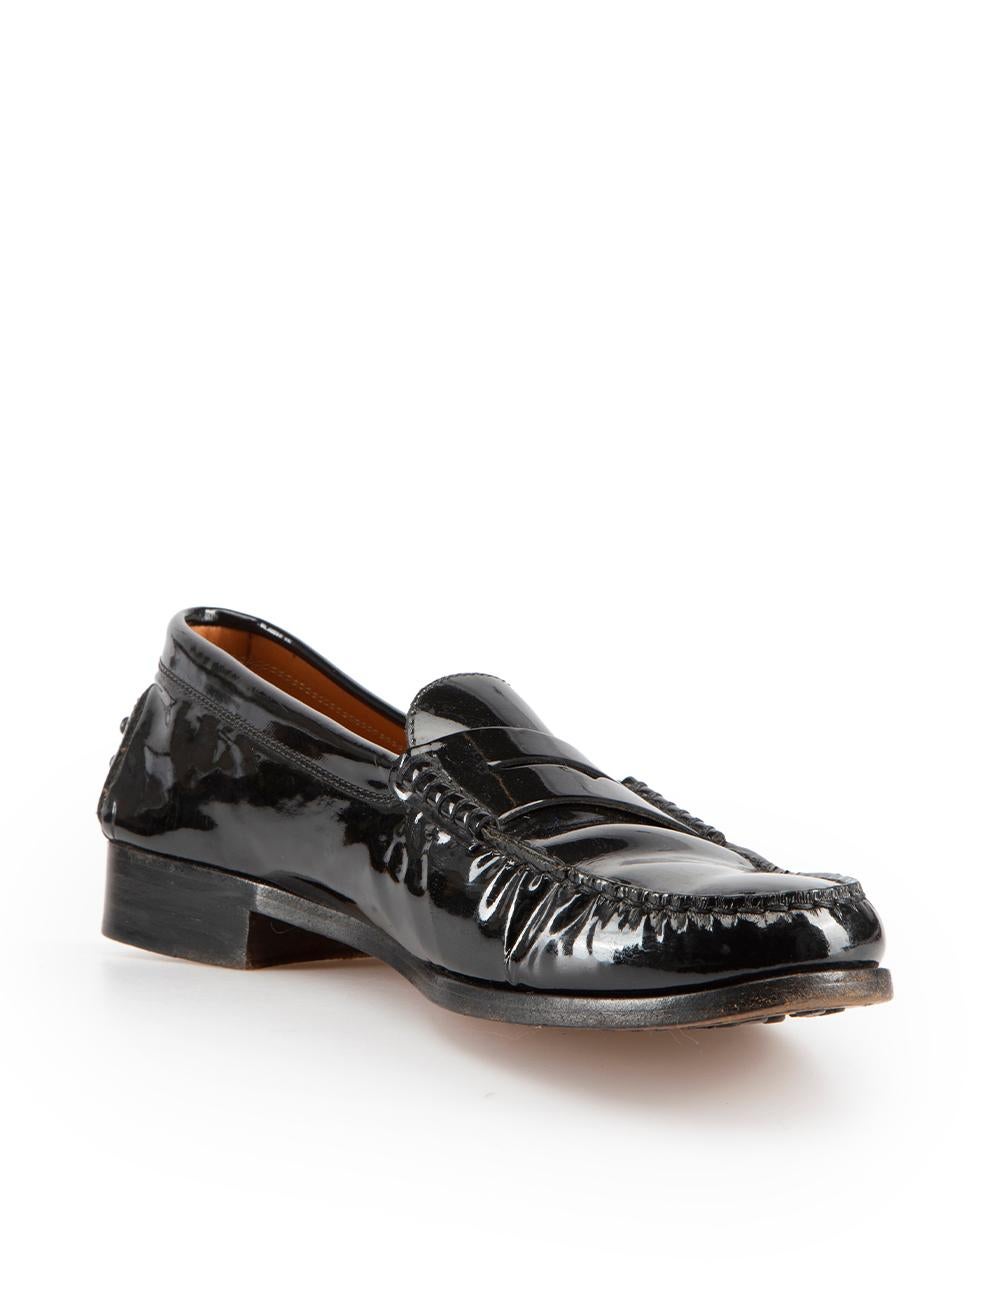 CONDITION is Good. Minor wear to loafers is evident. Light wear to uppers with creasing seen throughout the forepart and noticeable scuffing at the outsole on this used Tod's designer resale item.

Details
Black
Patent leather
Loafers
Slip on
Round